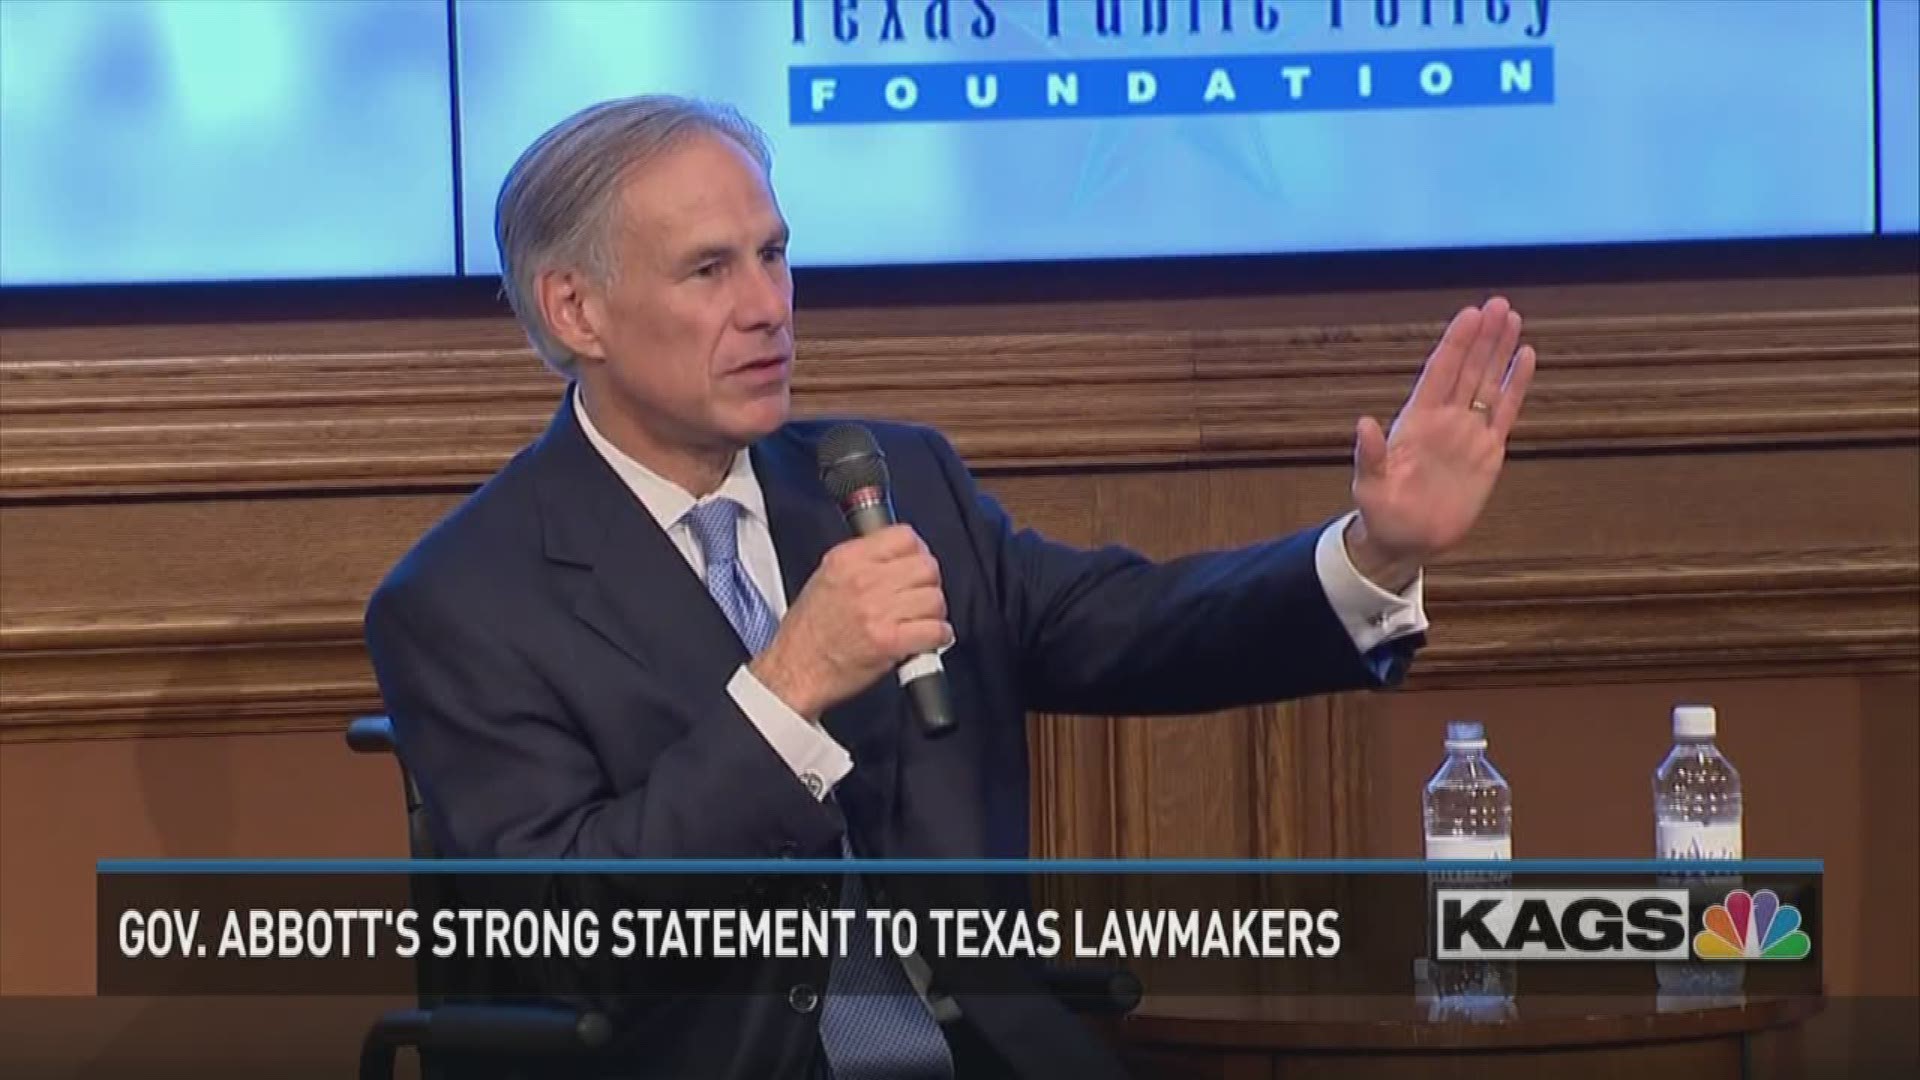 Governor Abbott announce he will be tracking the votes of lawmakers on key issues.